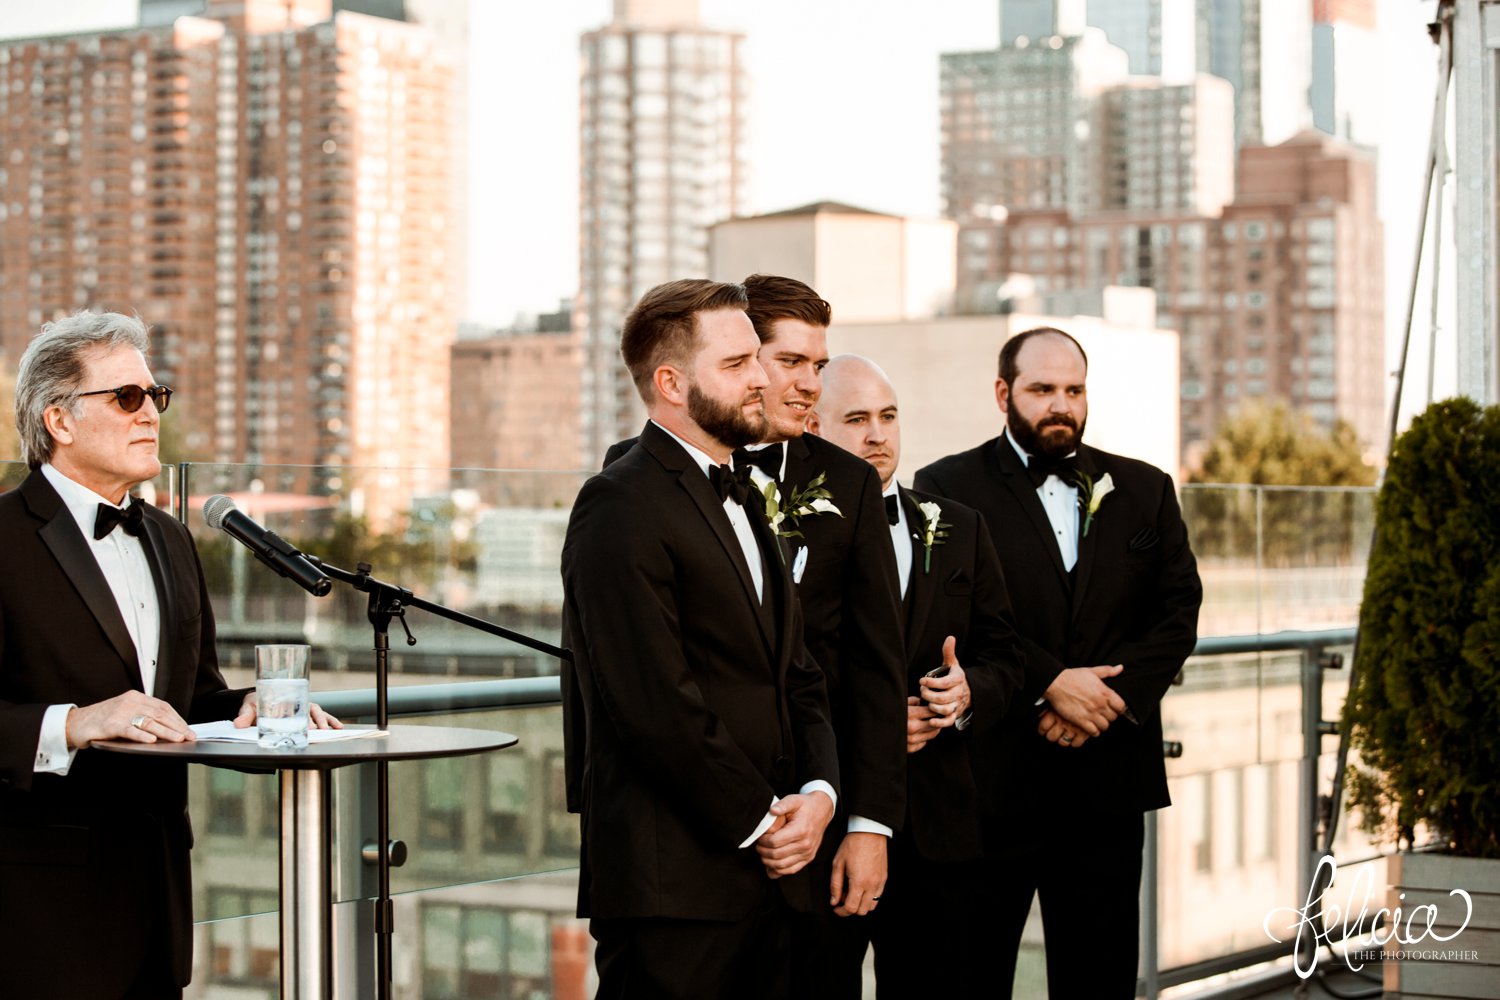 images by feliciathephotographer.com | destination wedding photographer | new york city | ceremony | rooftop | skyline | urban | romantic | classic | groom waiting at the end of the aisle | black tuxedo | family | emotional | mens warehouse | 